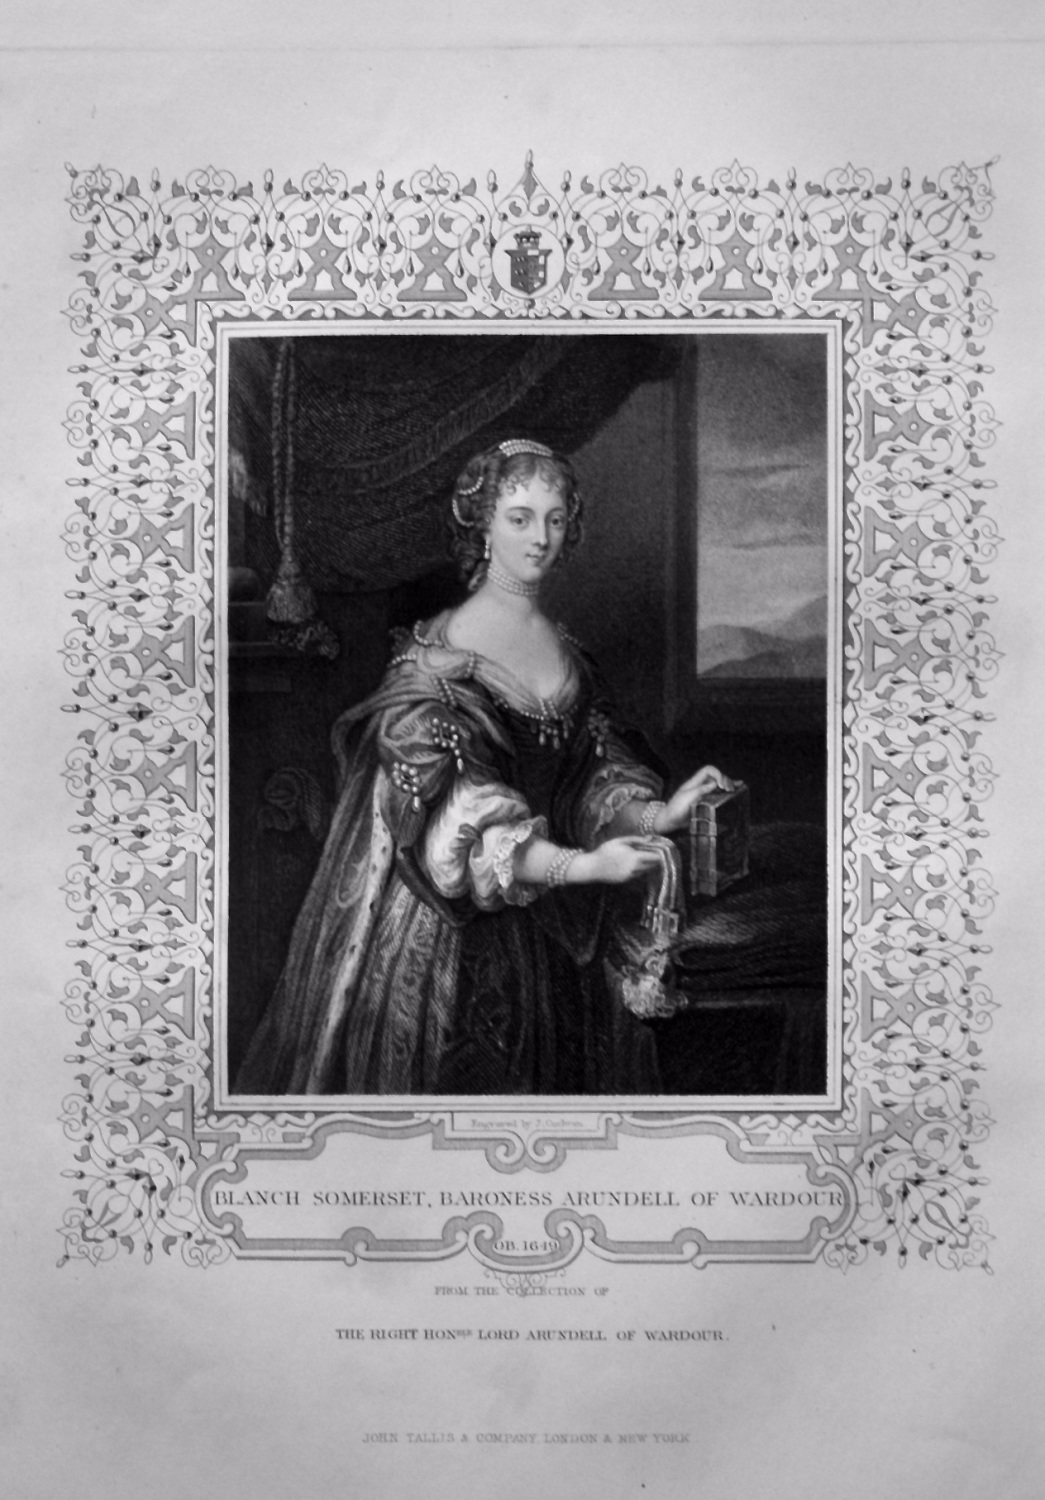 Blanch Somerset, Baroness Arundel of Wardour.  OB. 1649.  From the collecti